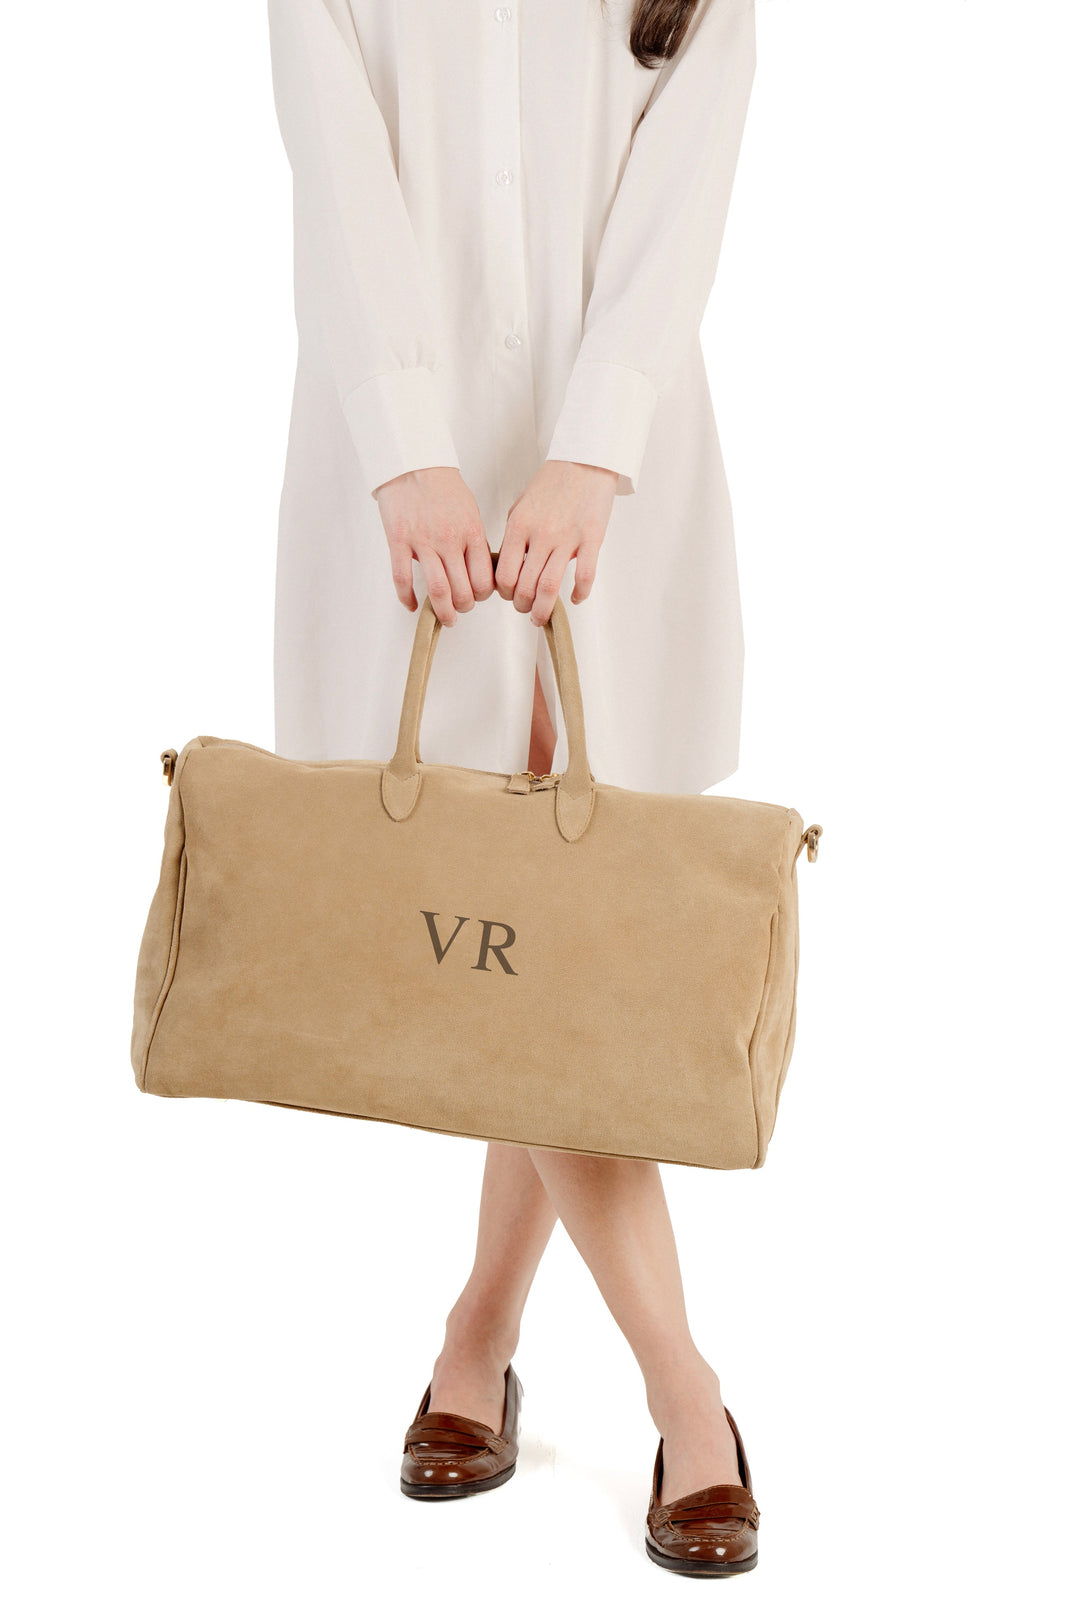 Woman holding beige duffle bag with initials VR on white background